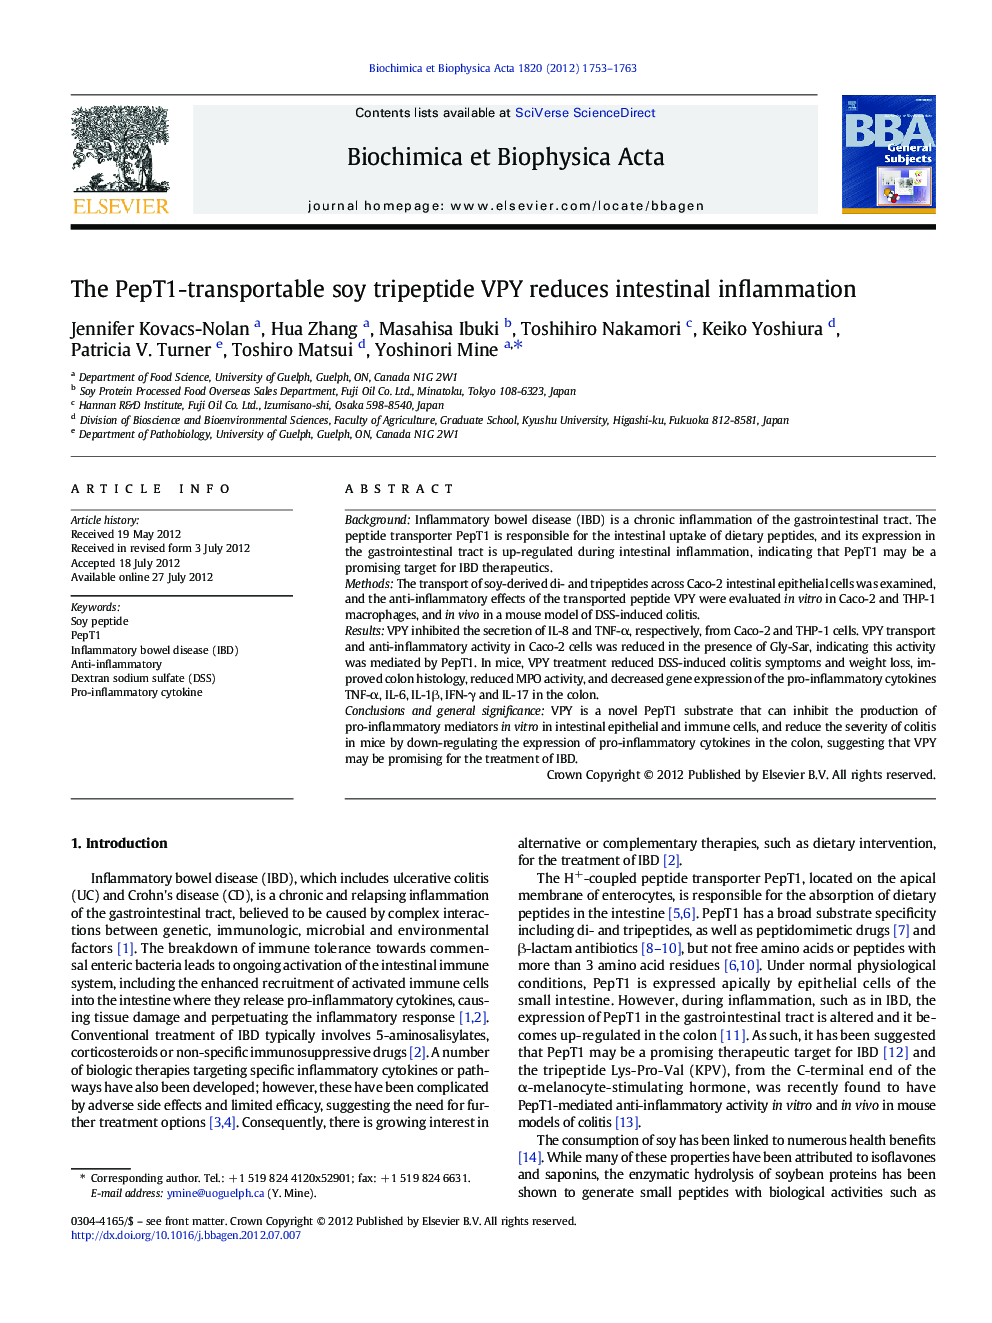 The PepT1-transportable soy tripeptide VPY reduces intestinal inflammation